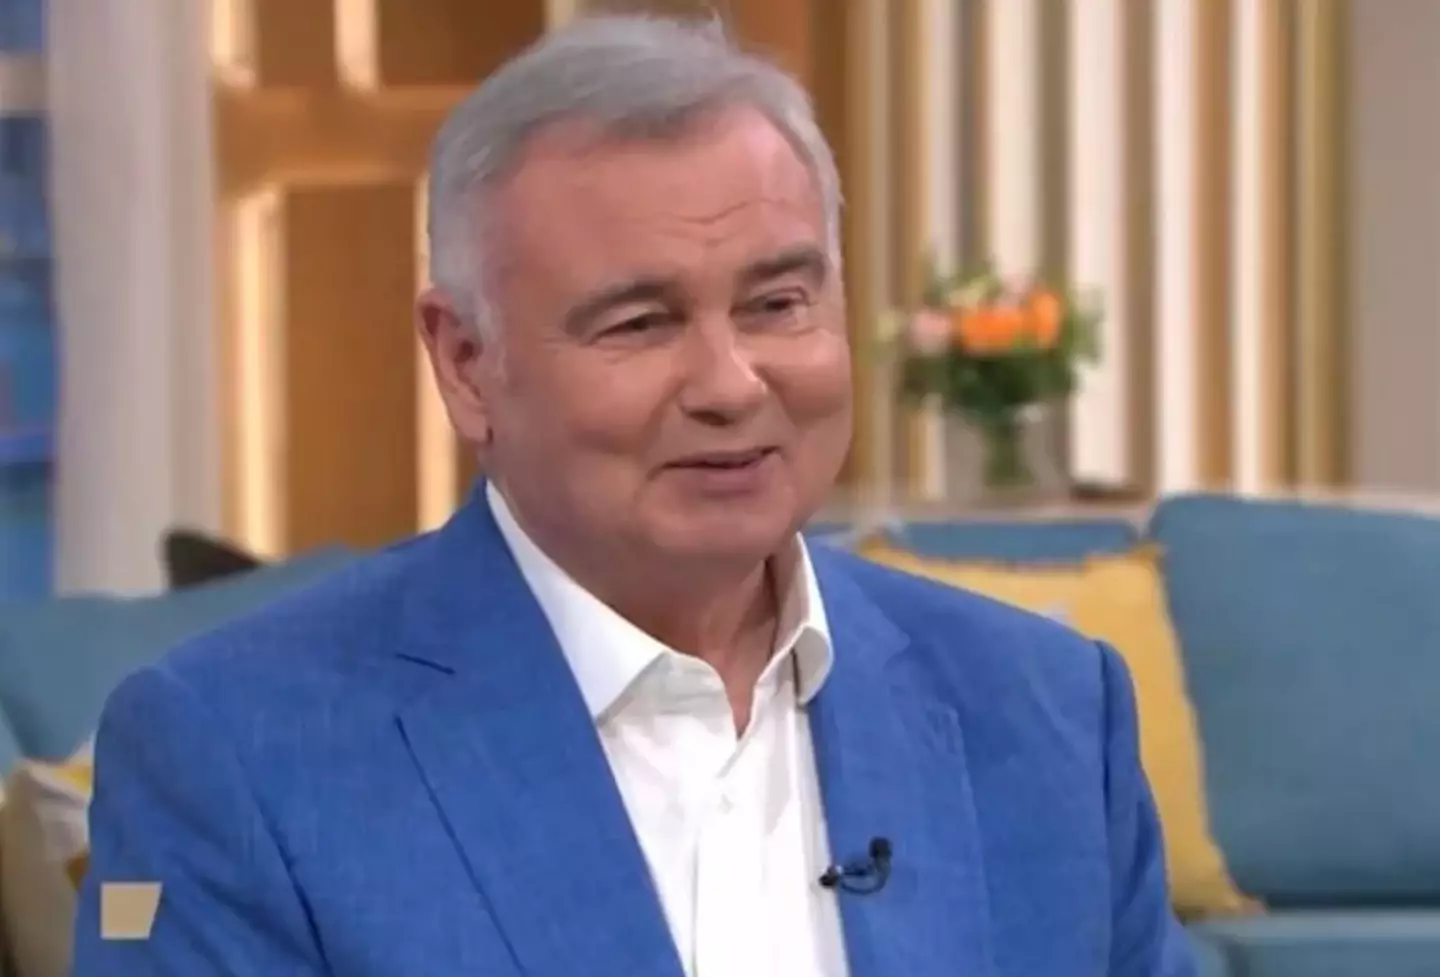 Eamonn Holmes took a swipe at his former colleague.